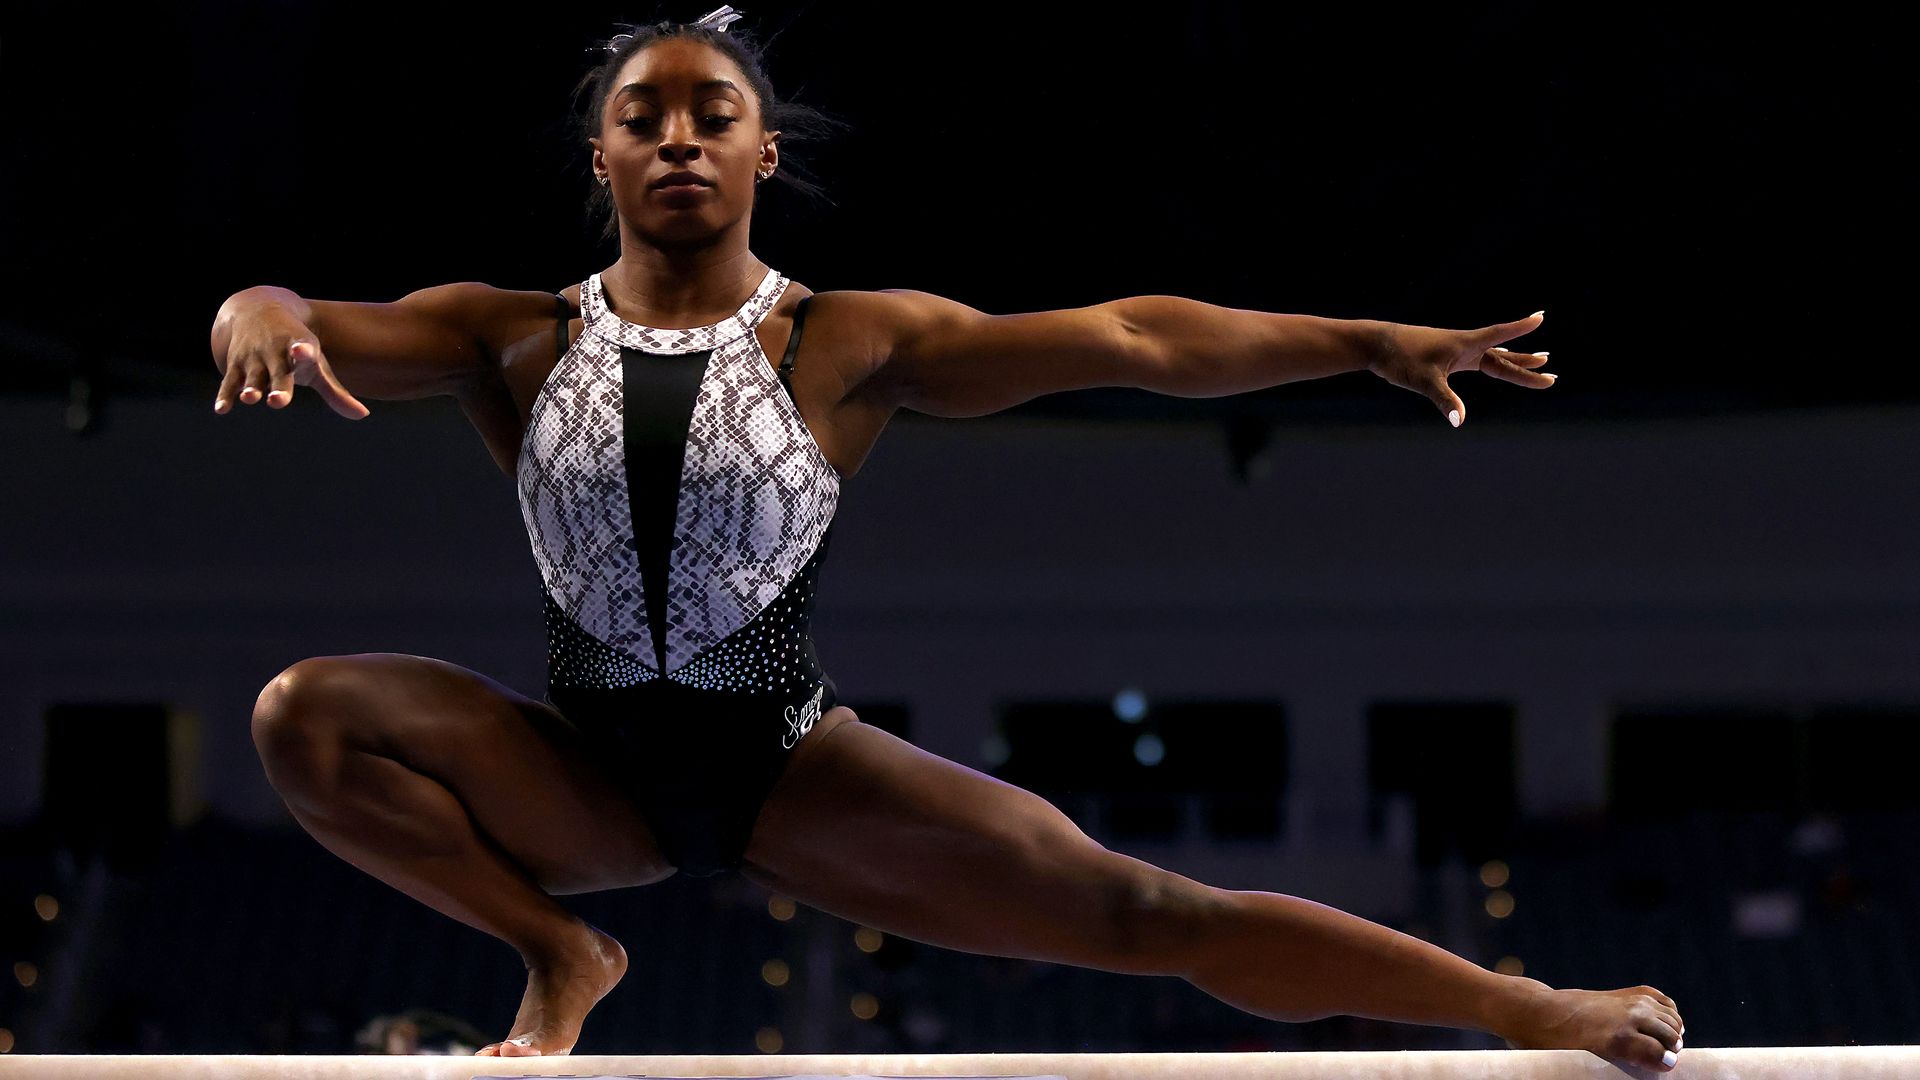 Simone Biles warms up on the beam prior to the Senior Women's competition of the U.S. Gymnastics Championships at Dickies Arena on June 06, 2021 in Fort Worth, Texas.